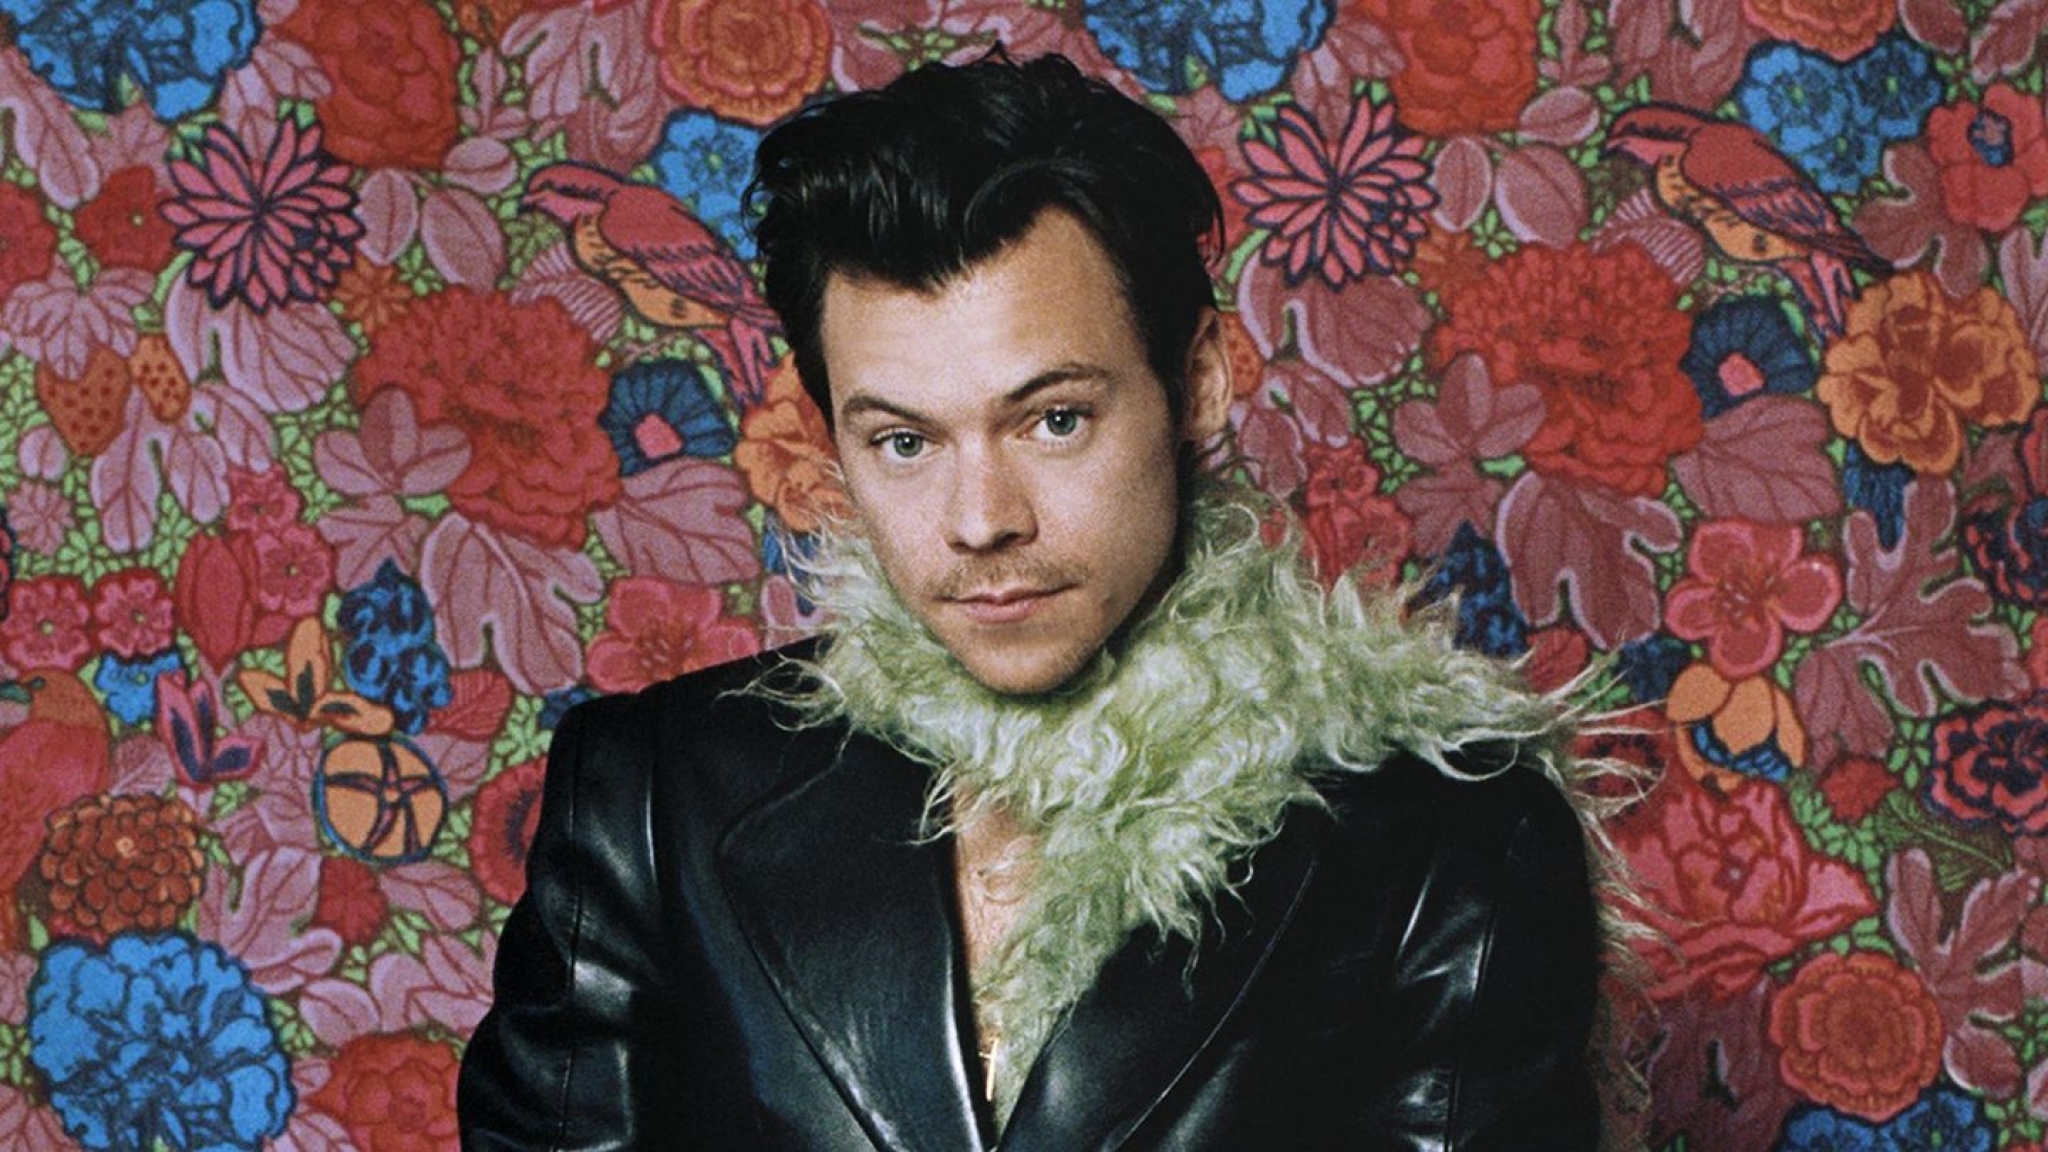 Harry Styles Flips His Fins In Hilarious Little Mermaid Photoshoot